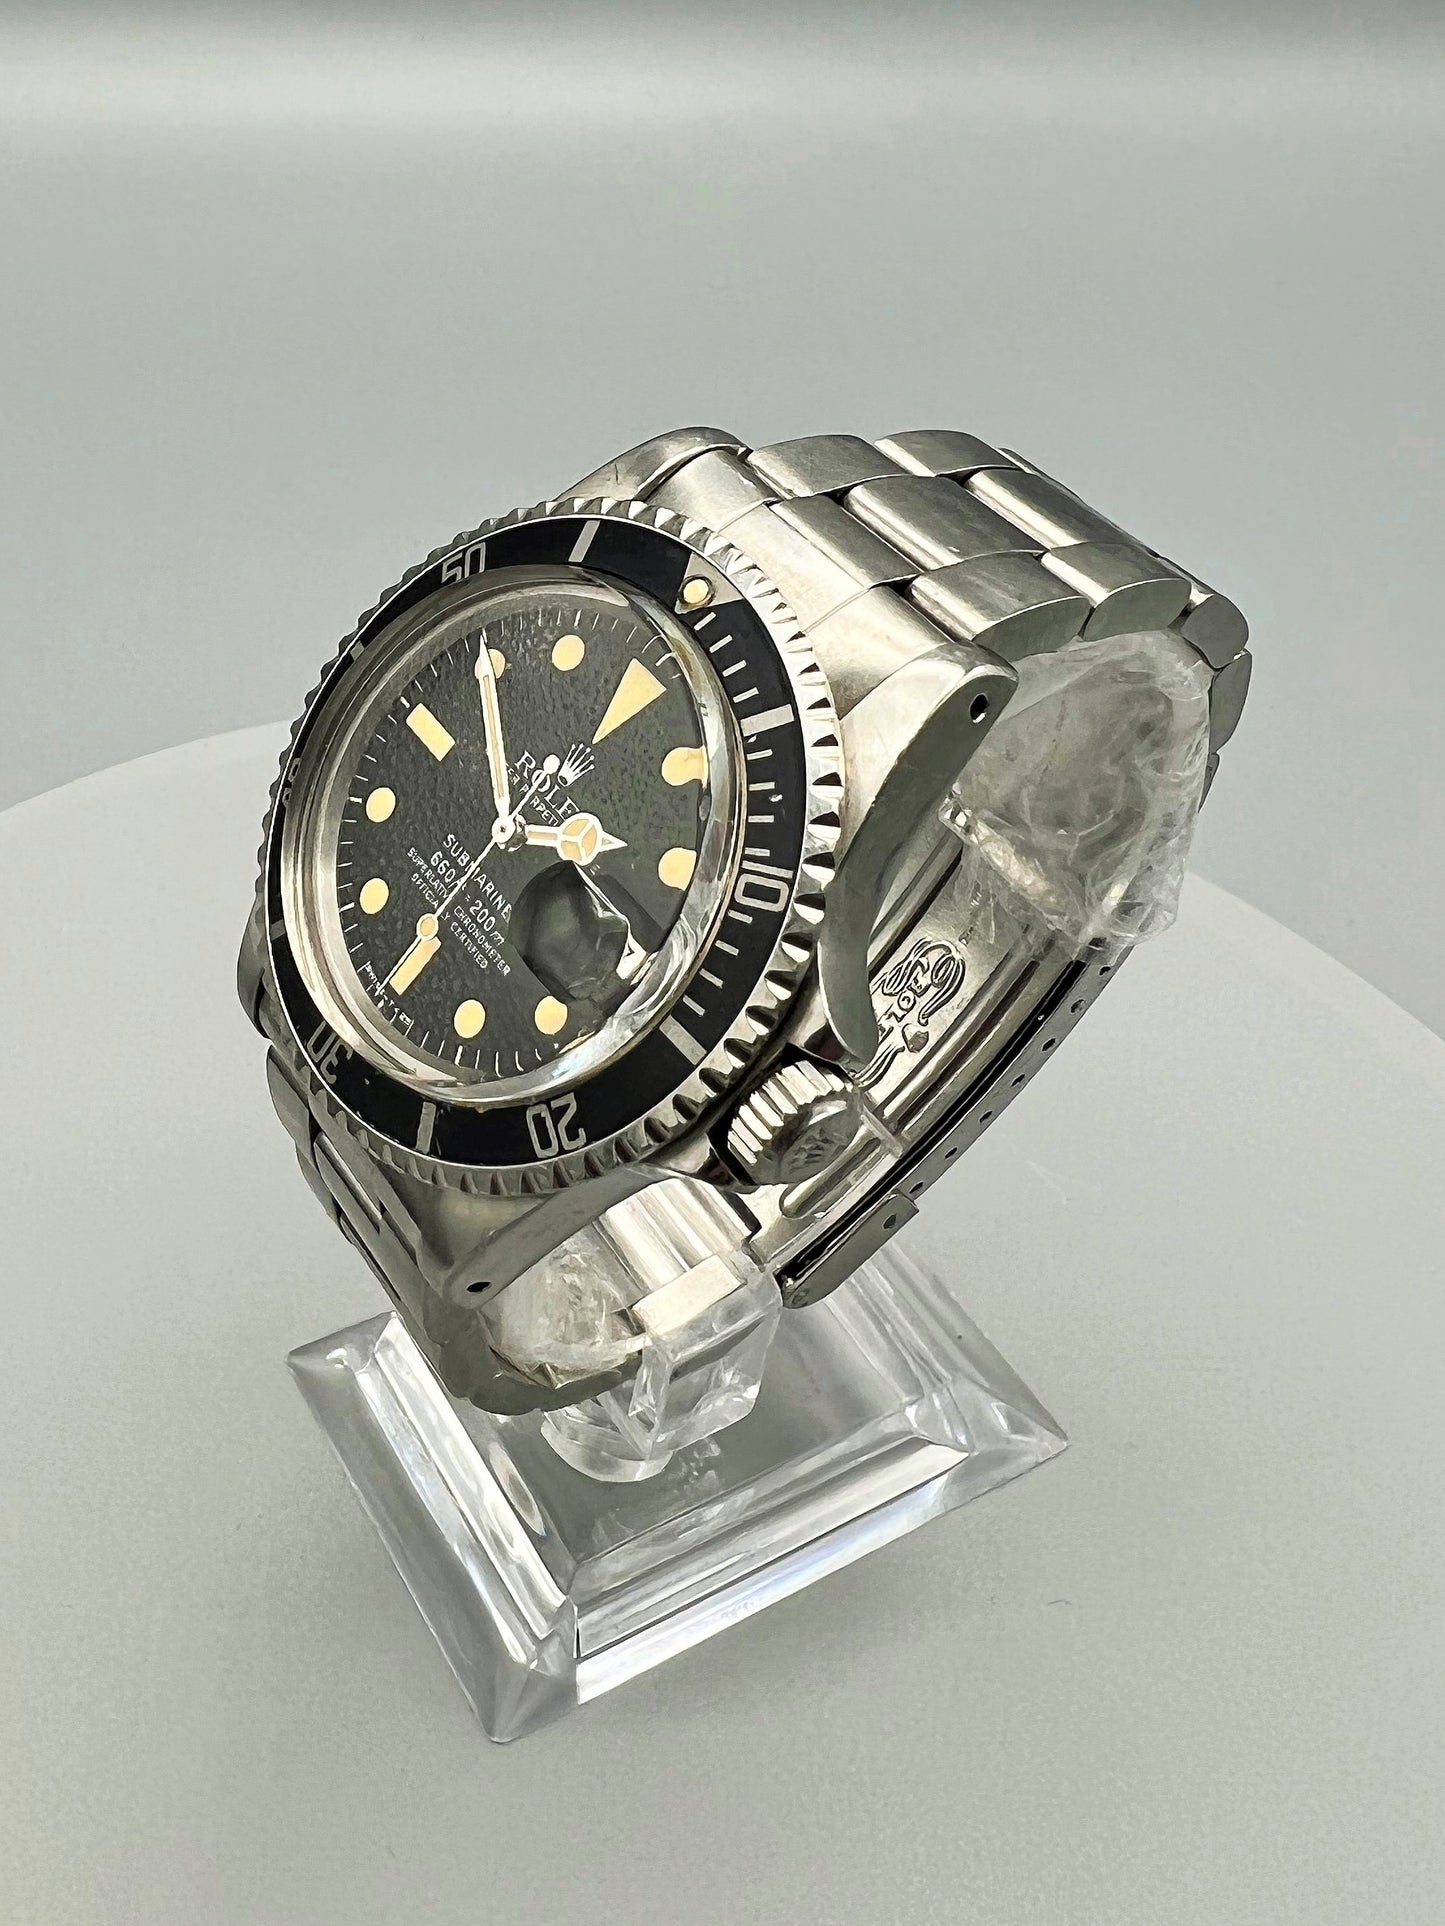 Rolex Ref 1680 Submariner Date, Circa 1979, completely authentic and unpolished